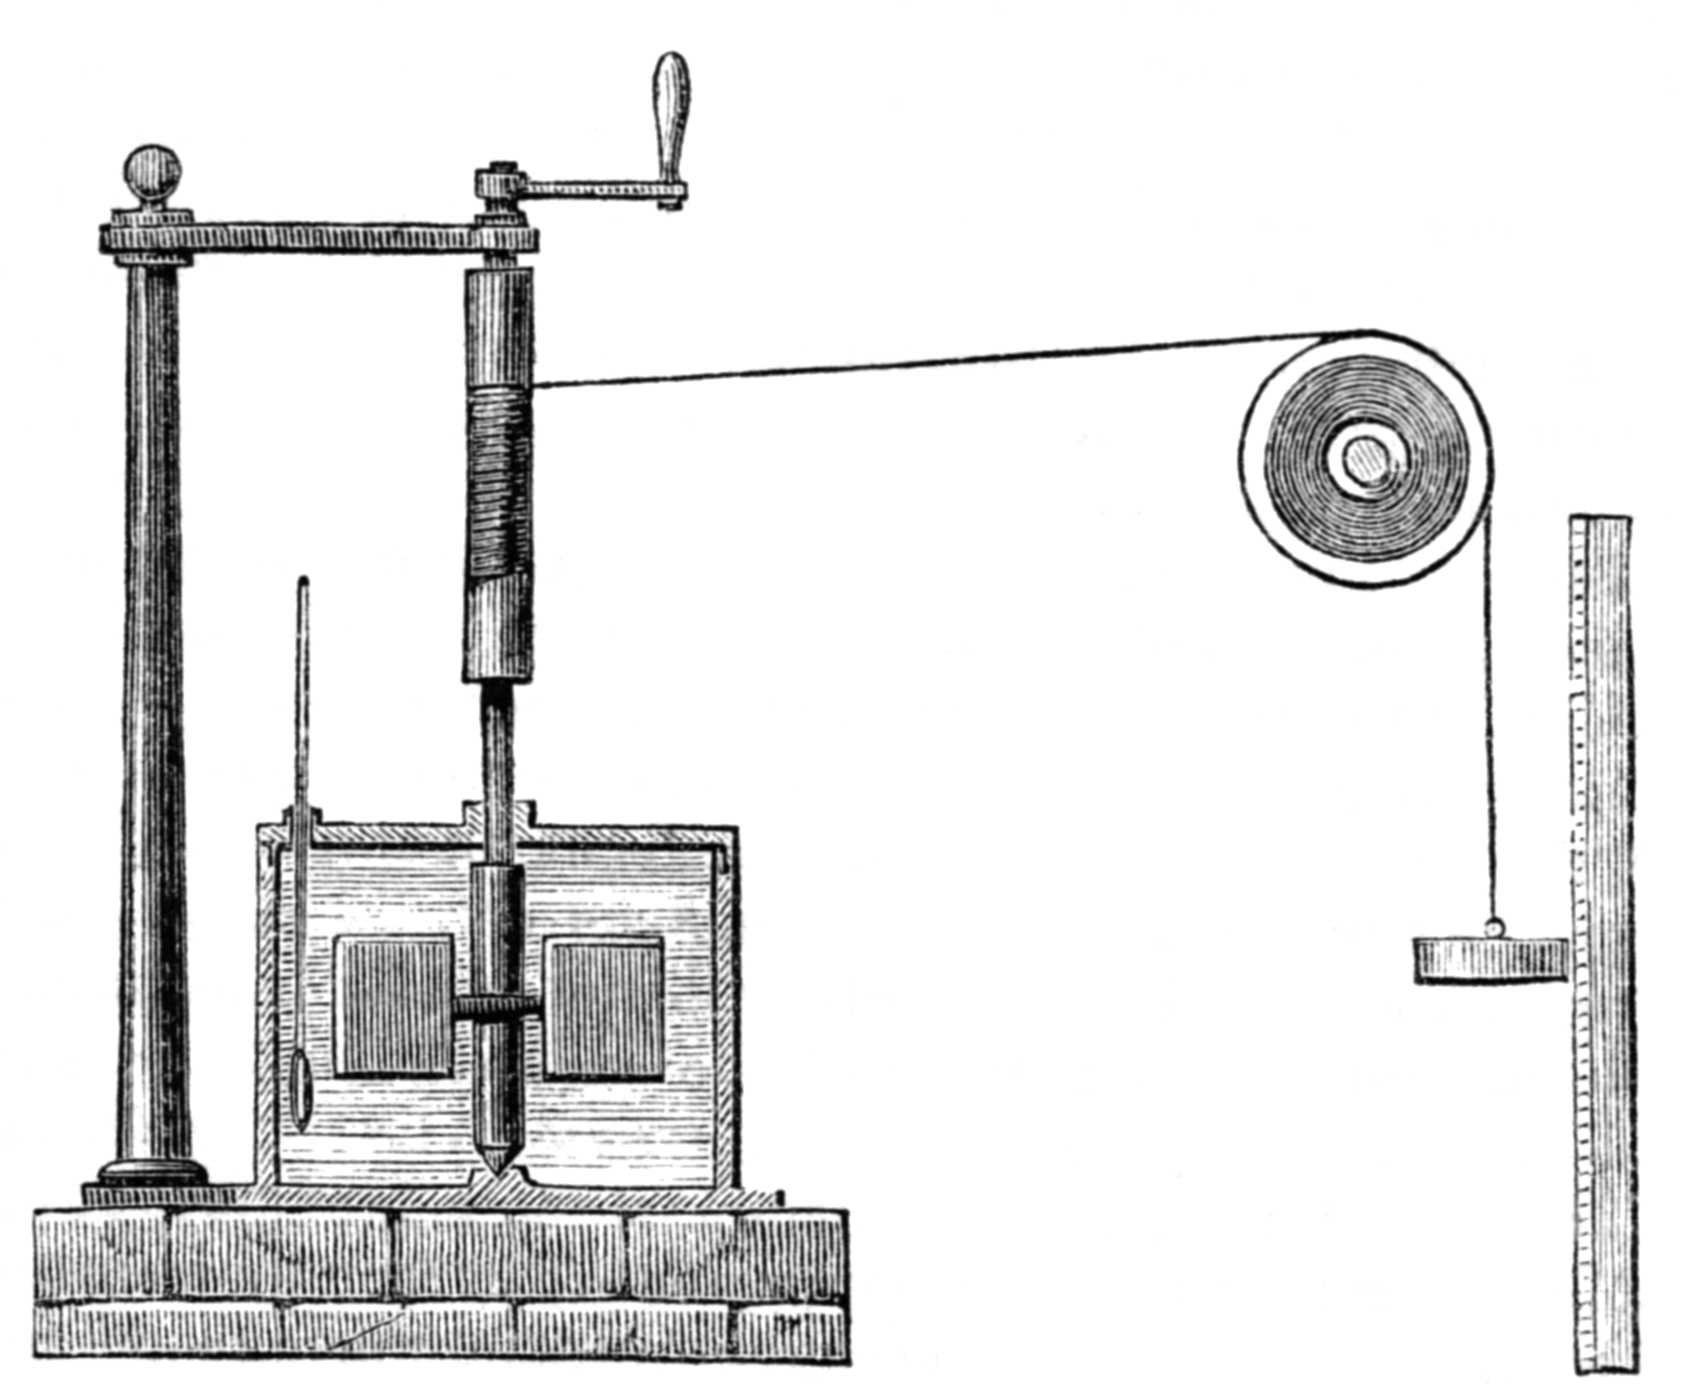 Joule’s apparatus for measuring the mechanical equivalent of heat. A descending weight attached to a string causes a paddle immersed in water to rotate.